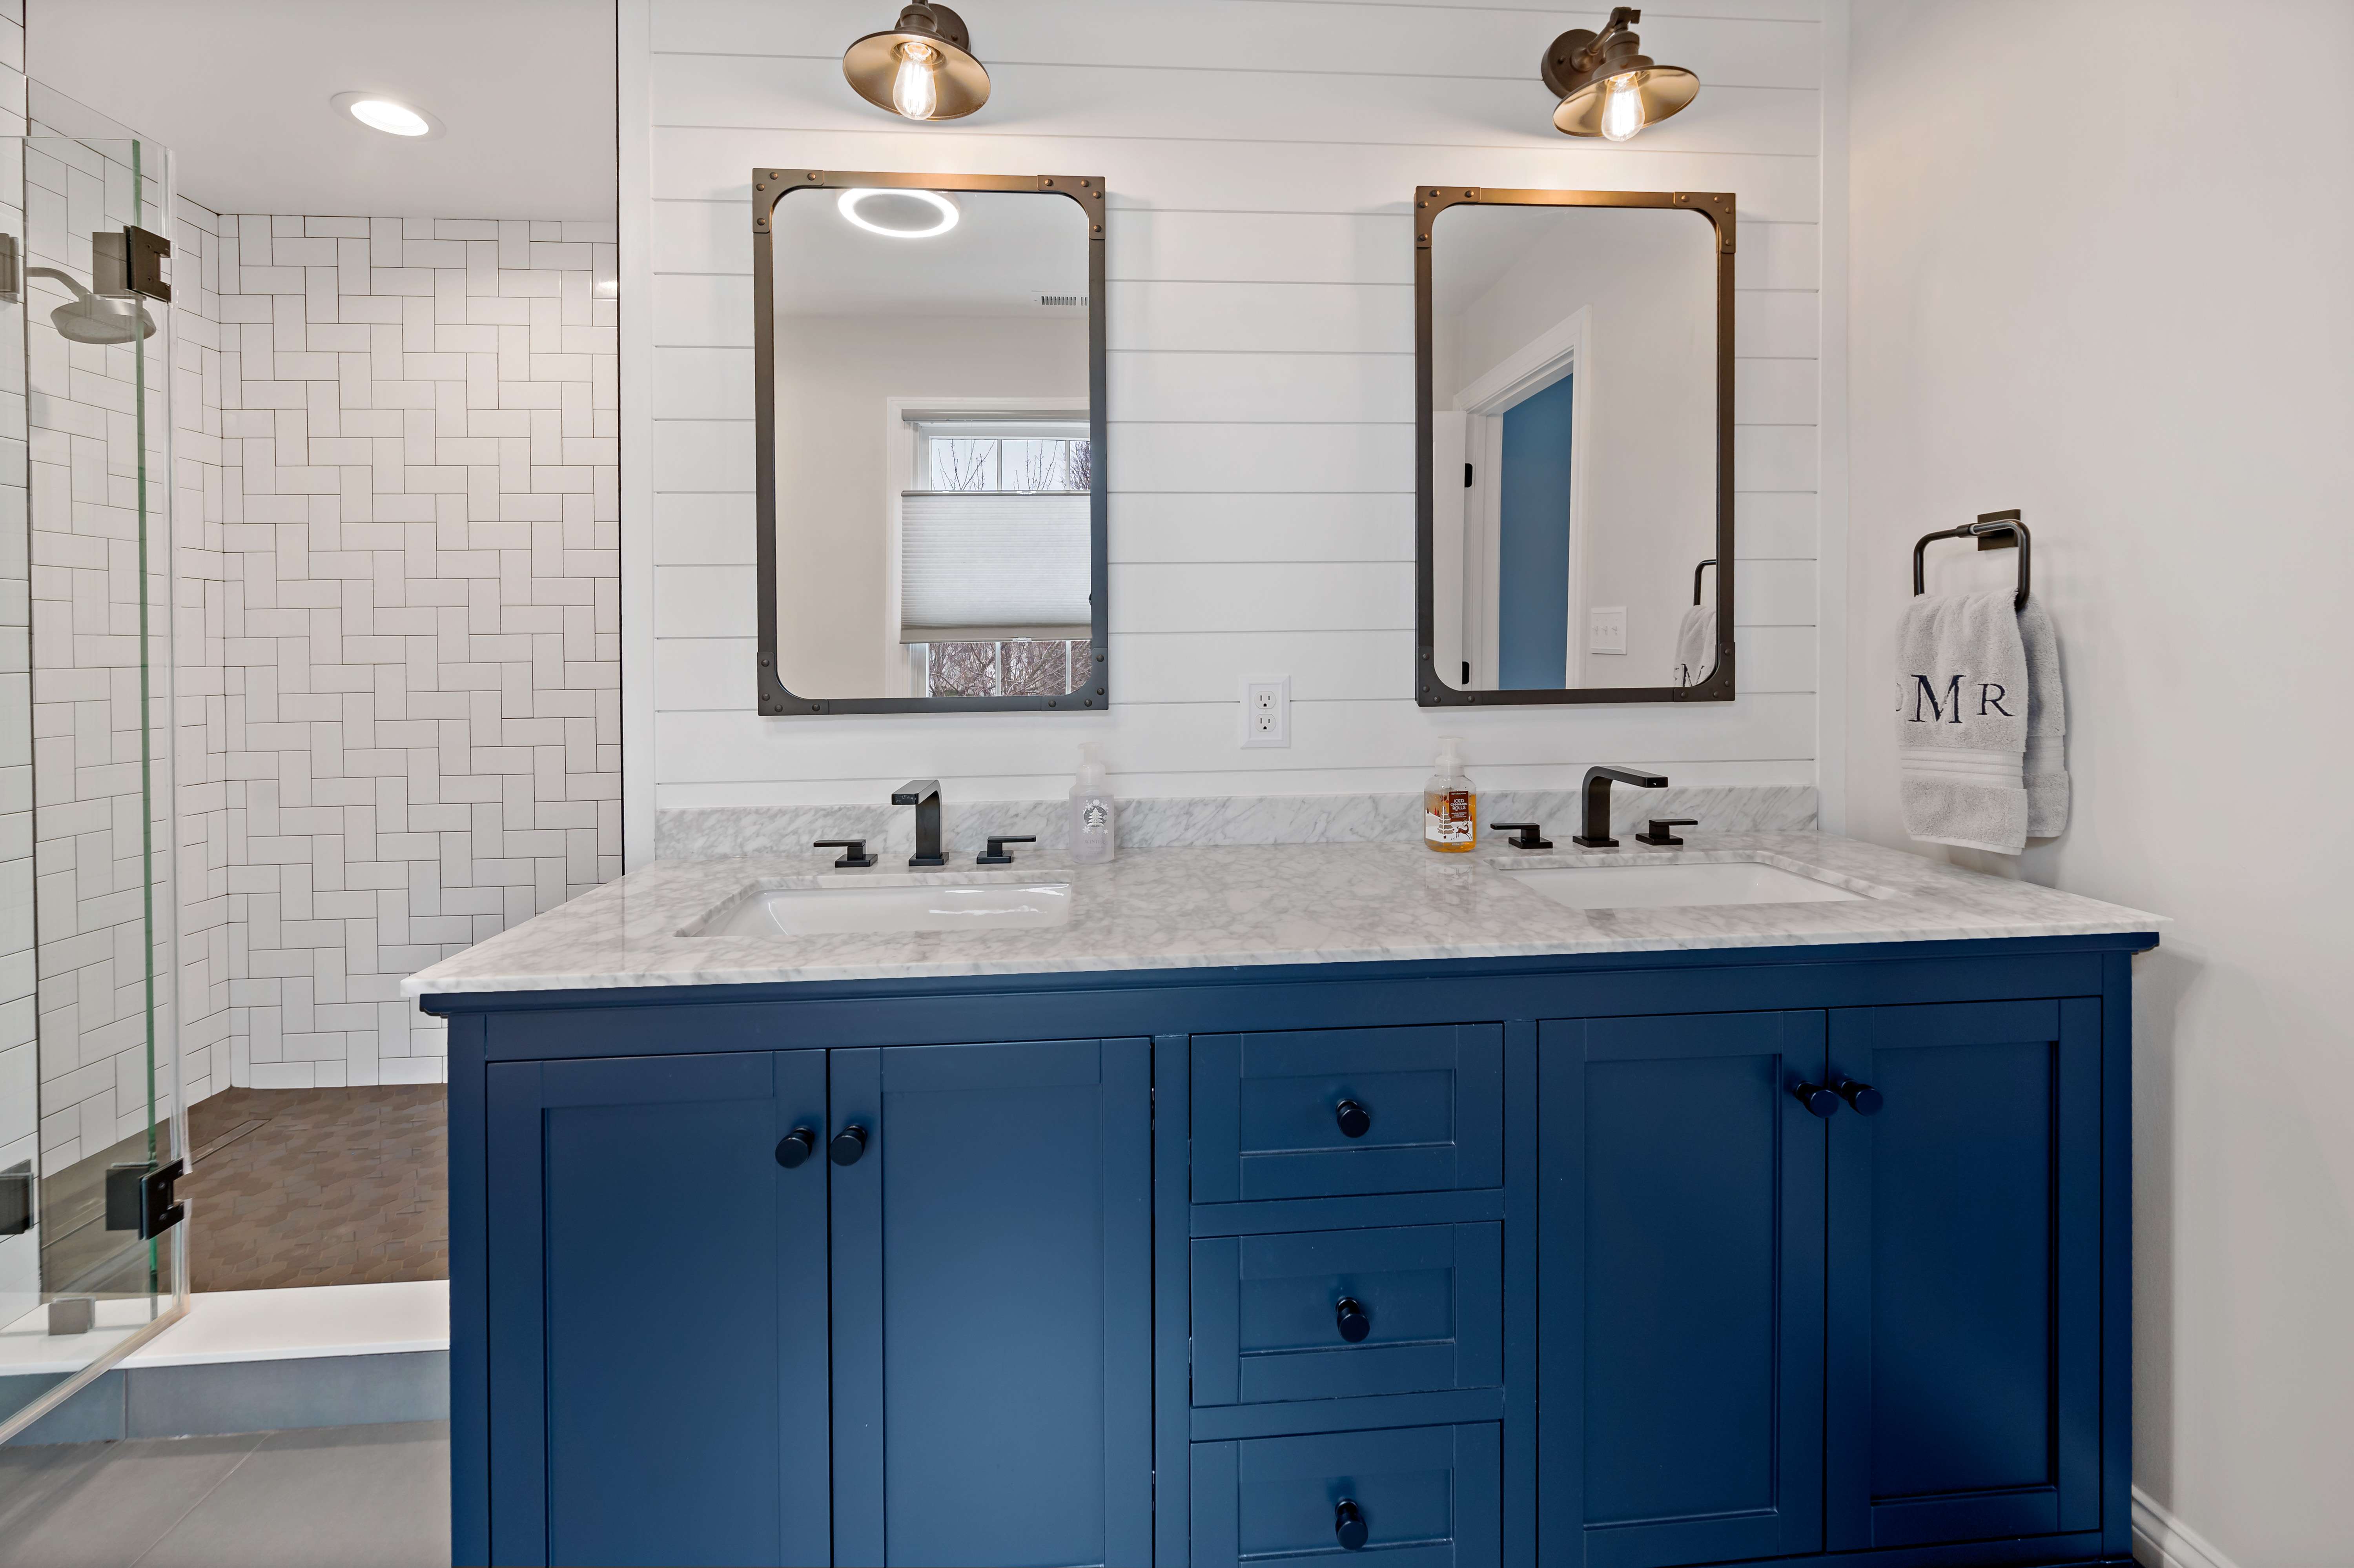 Double vanity and sink with dark blue cabinets in bathroom